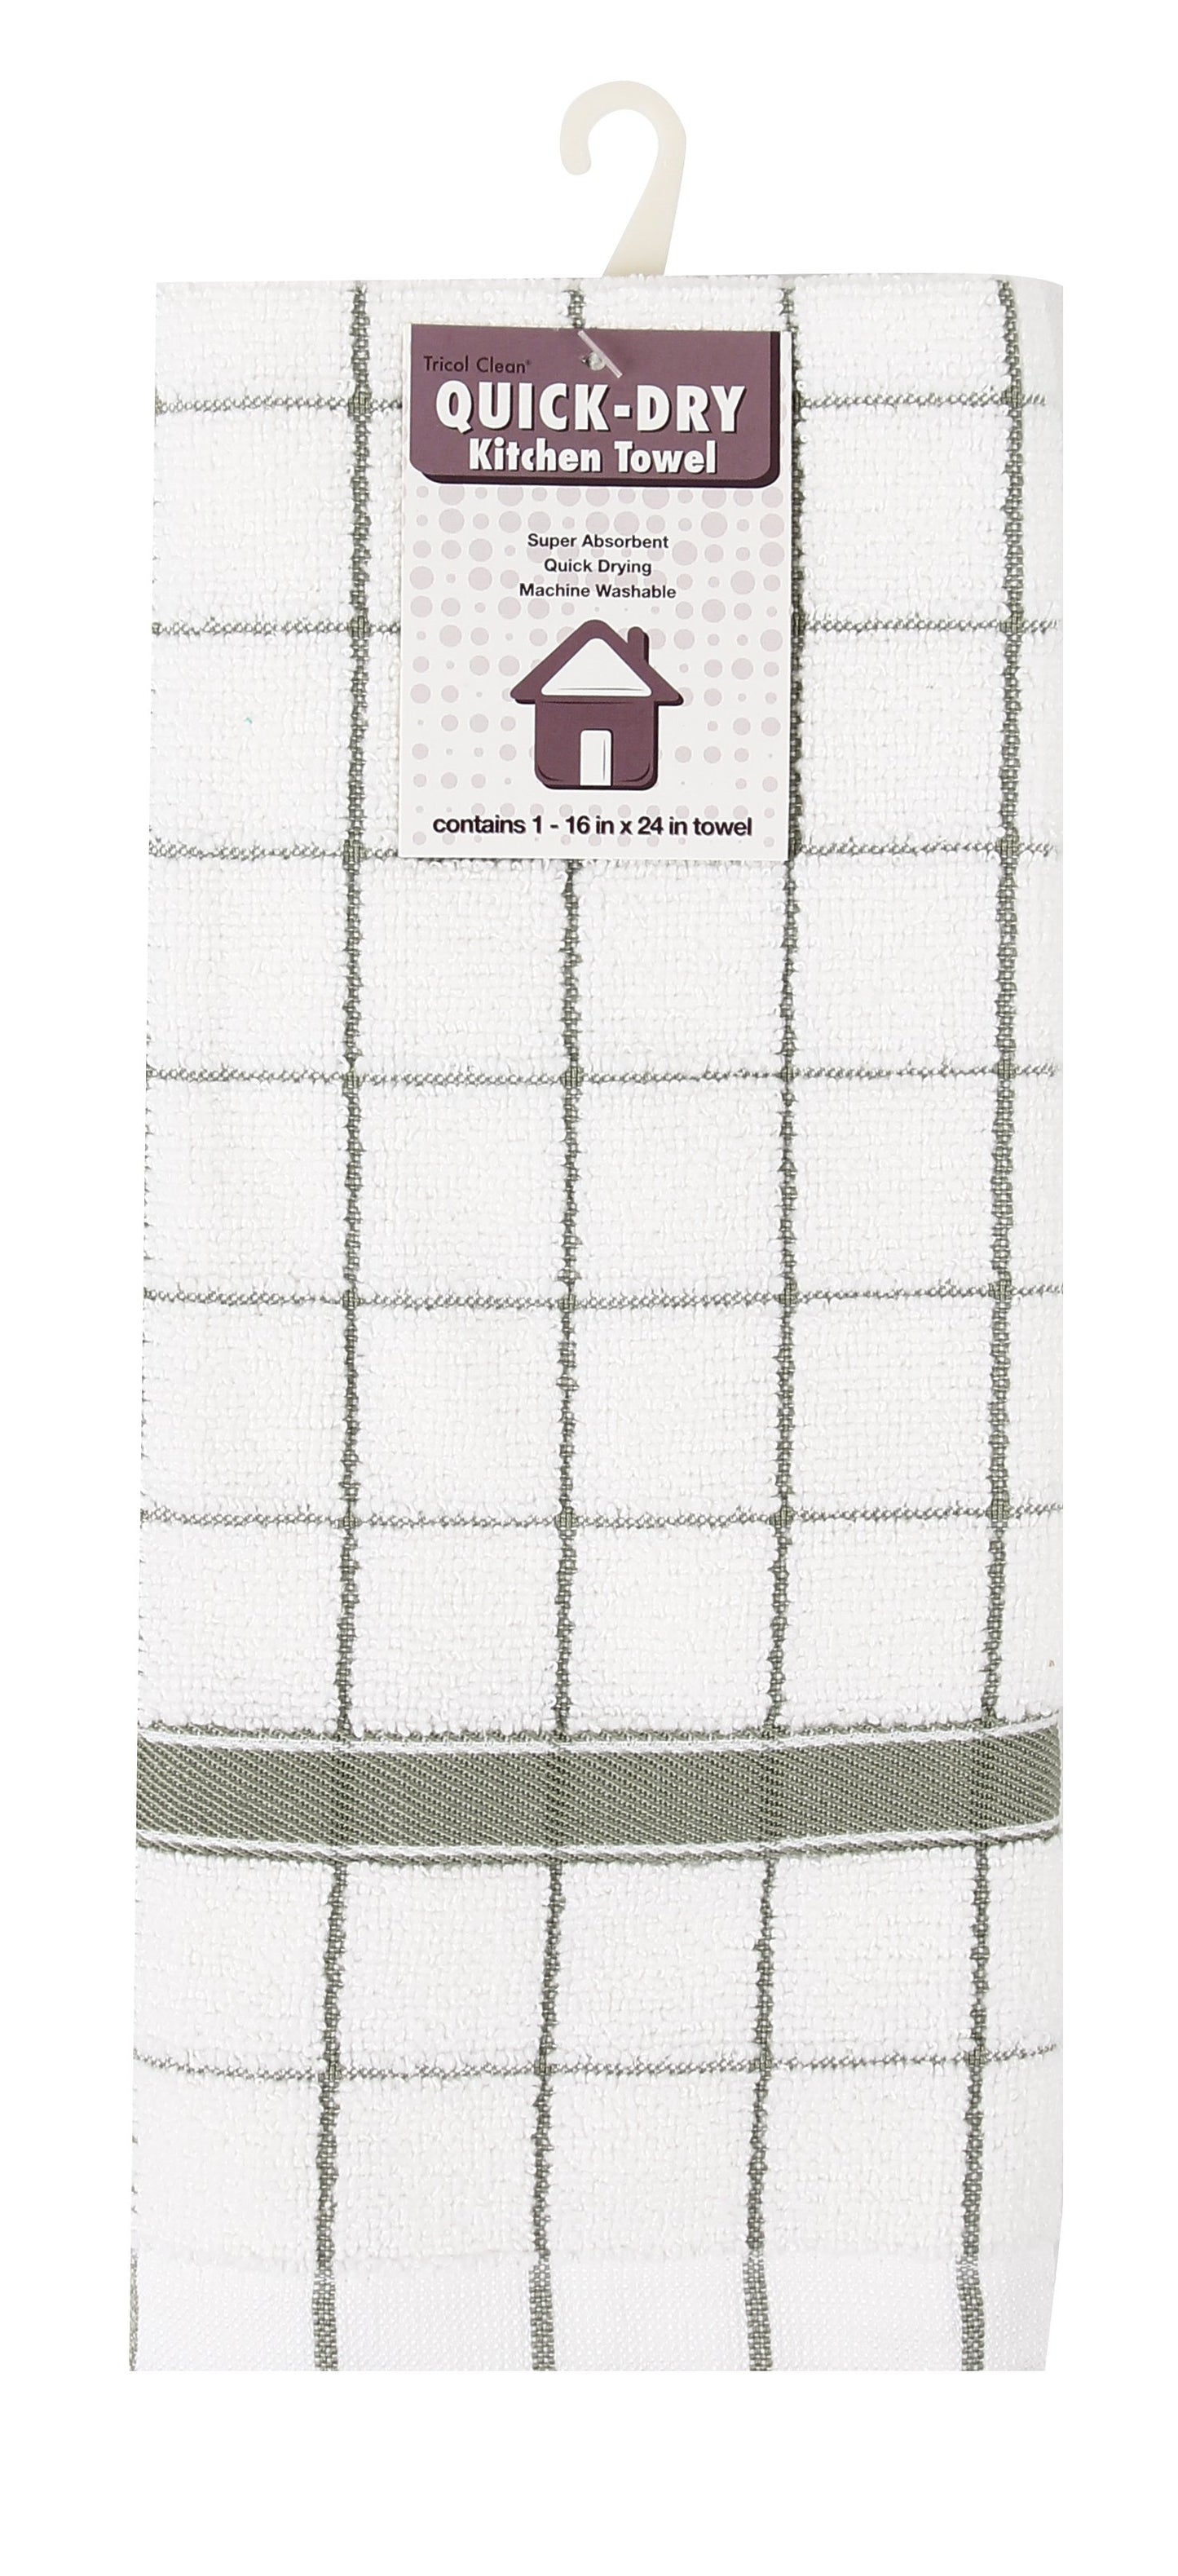 Classic Terry Kitchen Towel by The Everplush Company